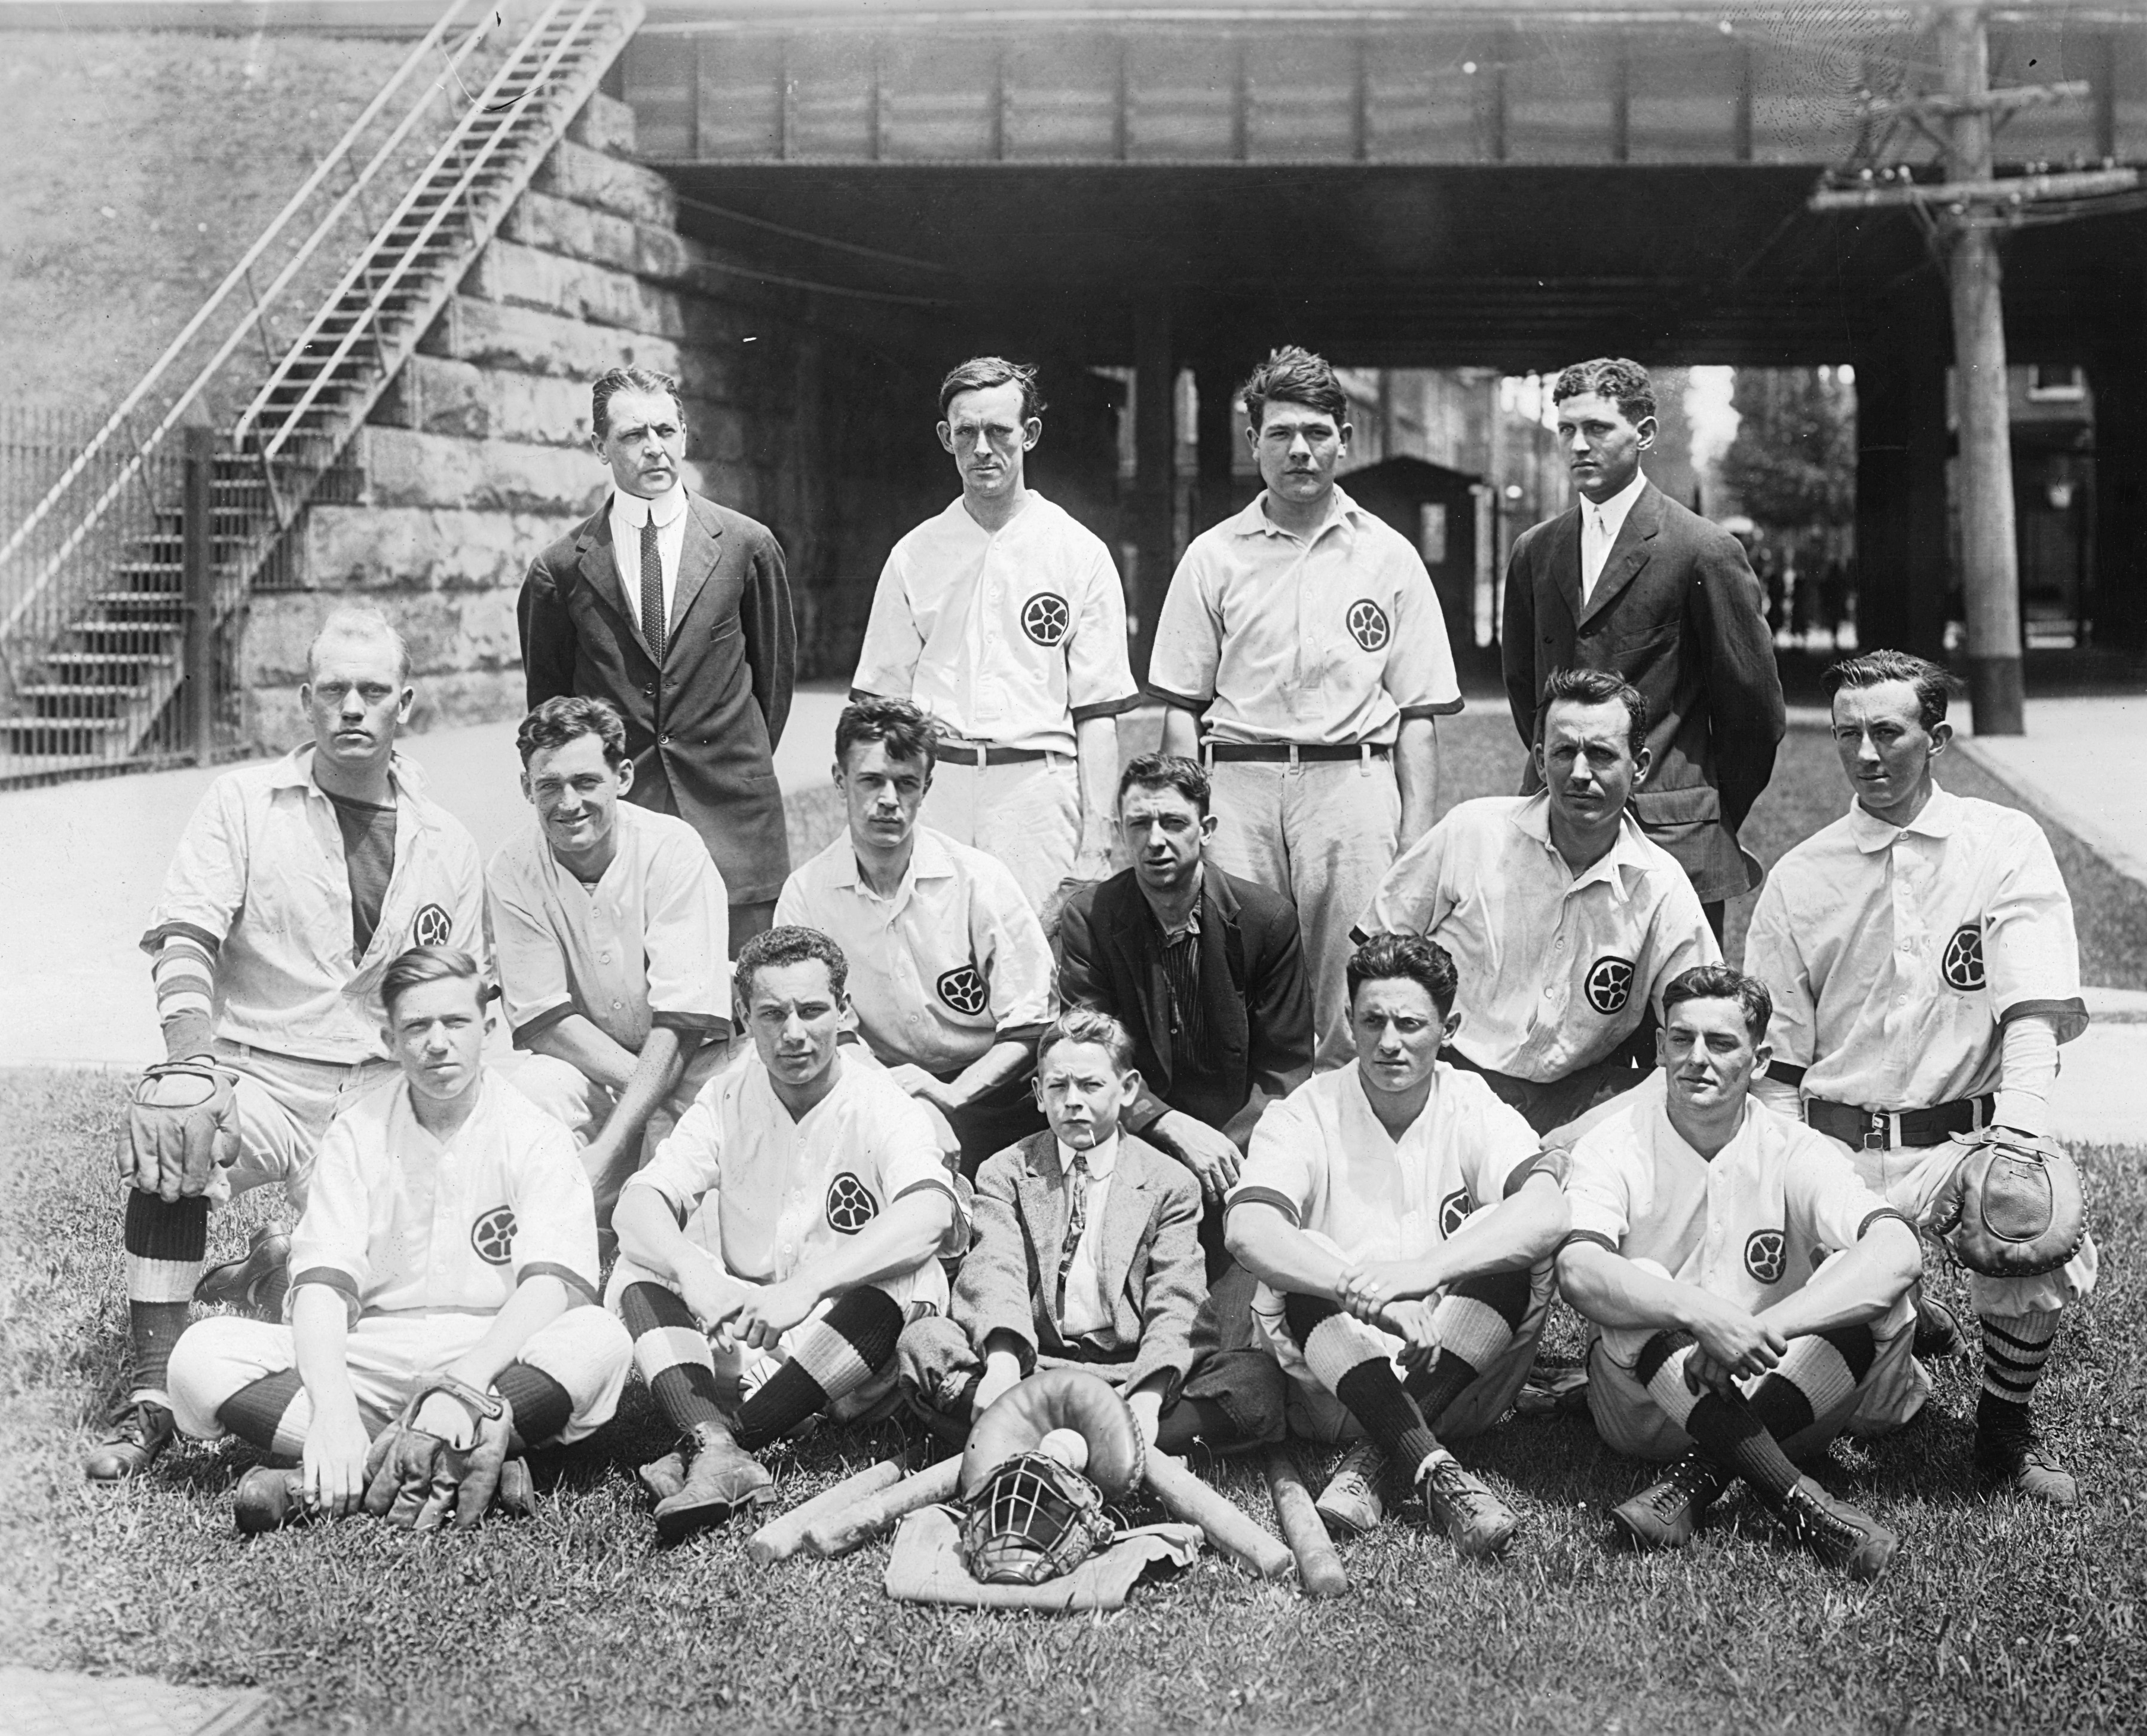 Black and white group portrait of the Pusey and Jones Company baseball team